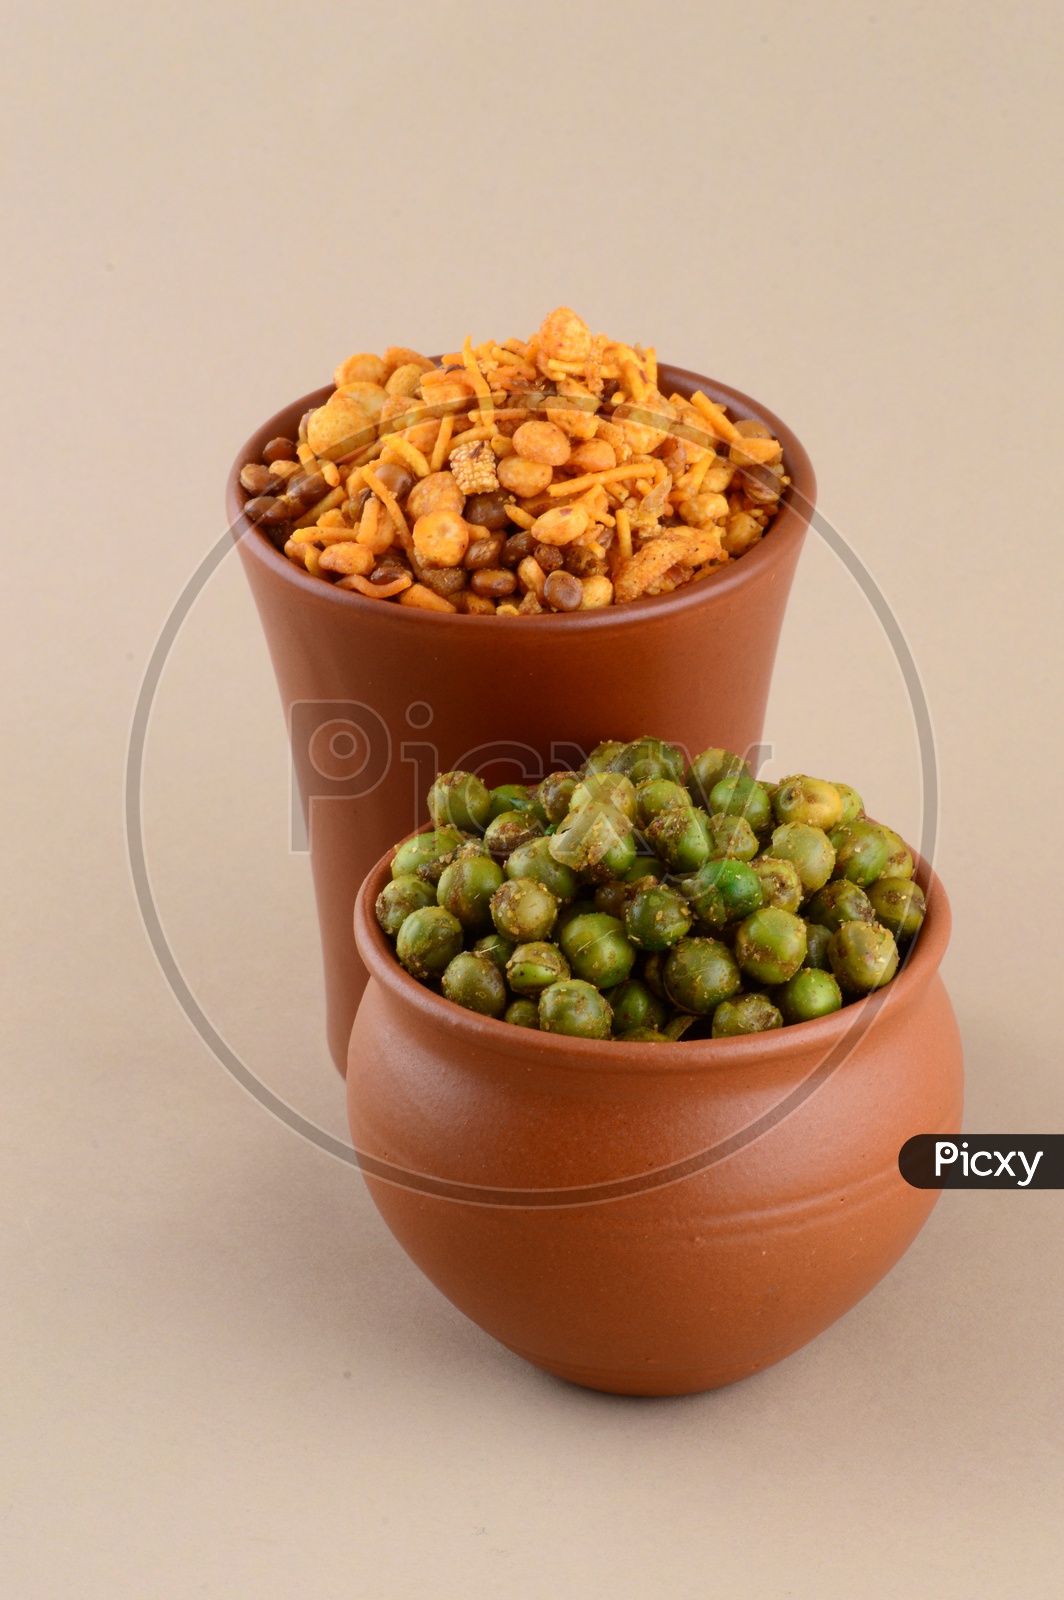 Indian Snack Salty Deep Fried Chivda Or  Mixture and Deep Fried Masala Green Peas  In a Clay Pots  On an Isolated Background